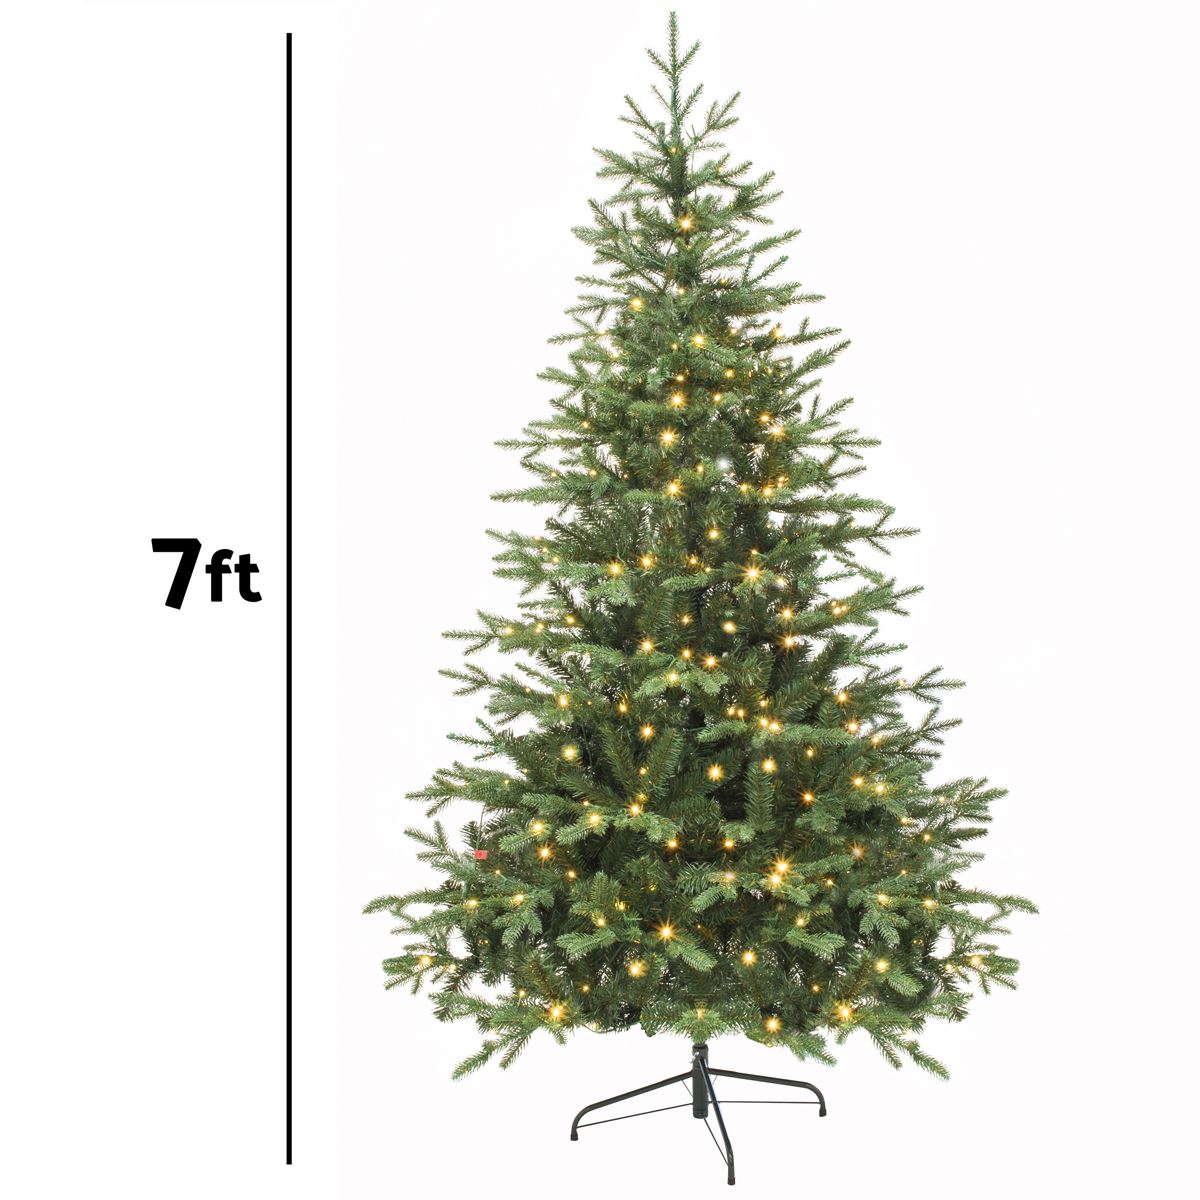 Dellonda Pre-Lit 7ft Hinged Christmas Tree with Warm White LED Lights & PE/PVC Tips